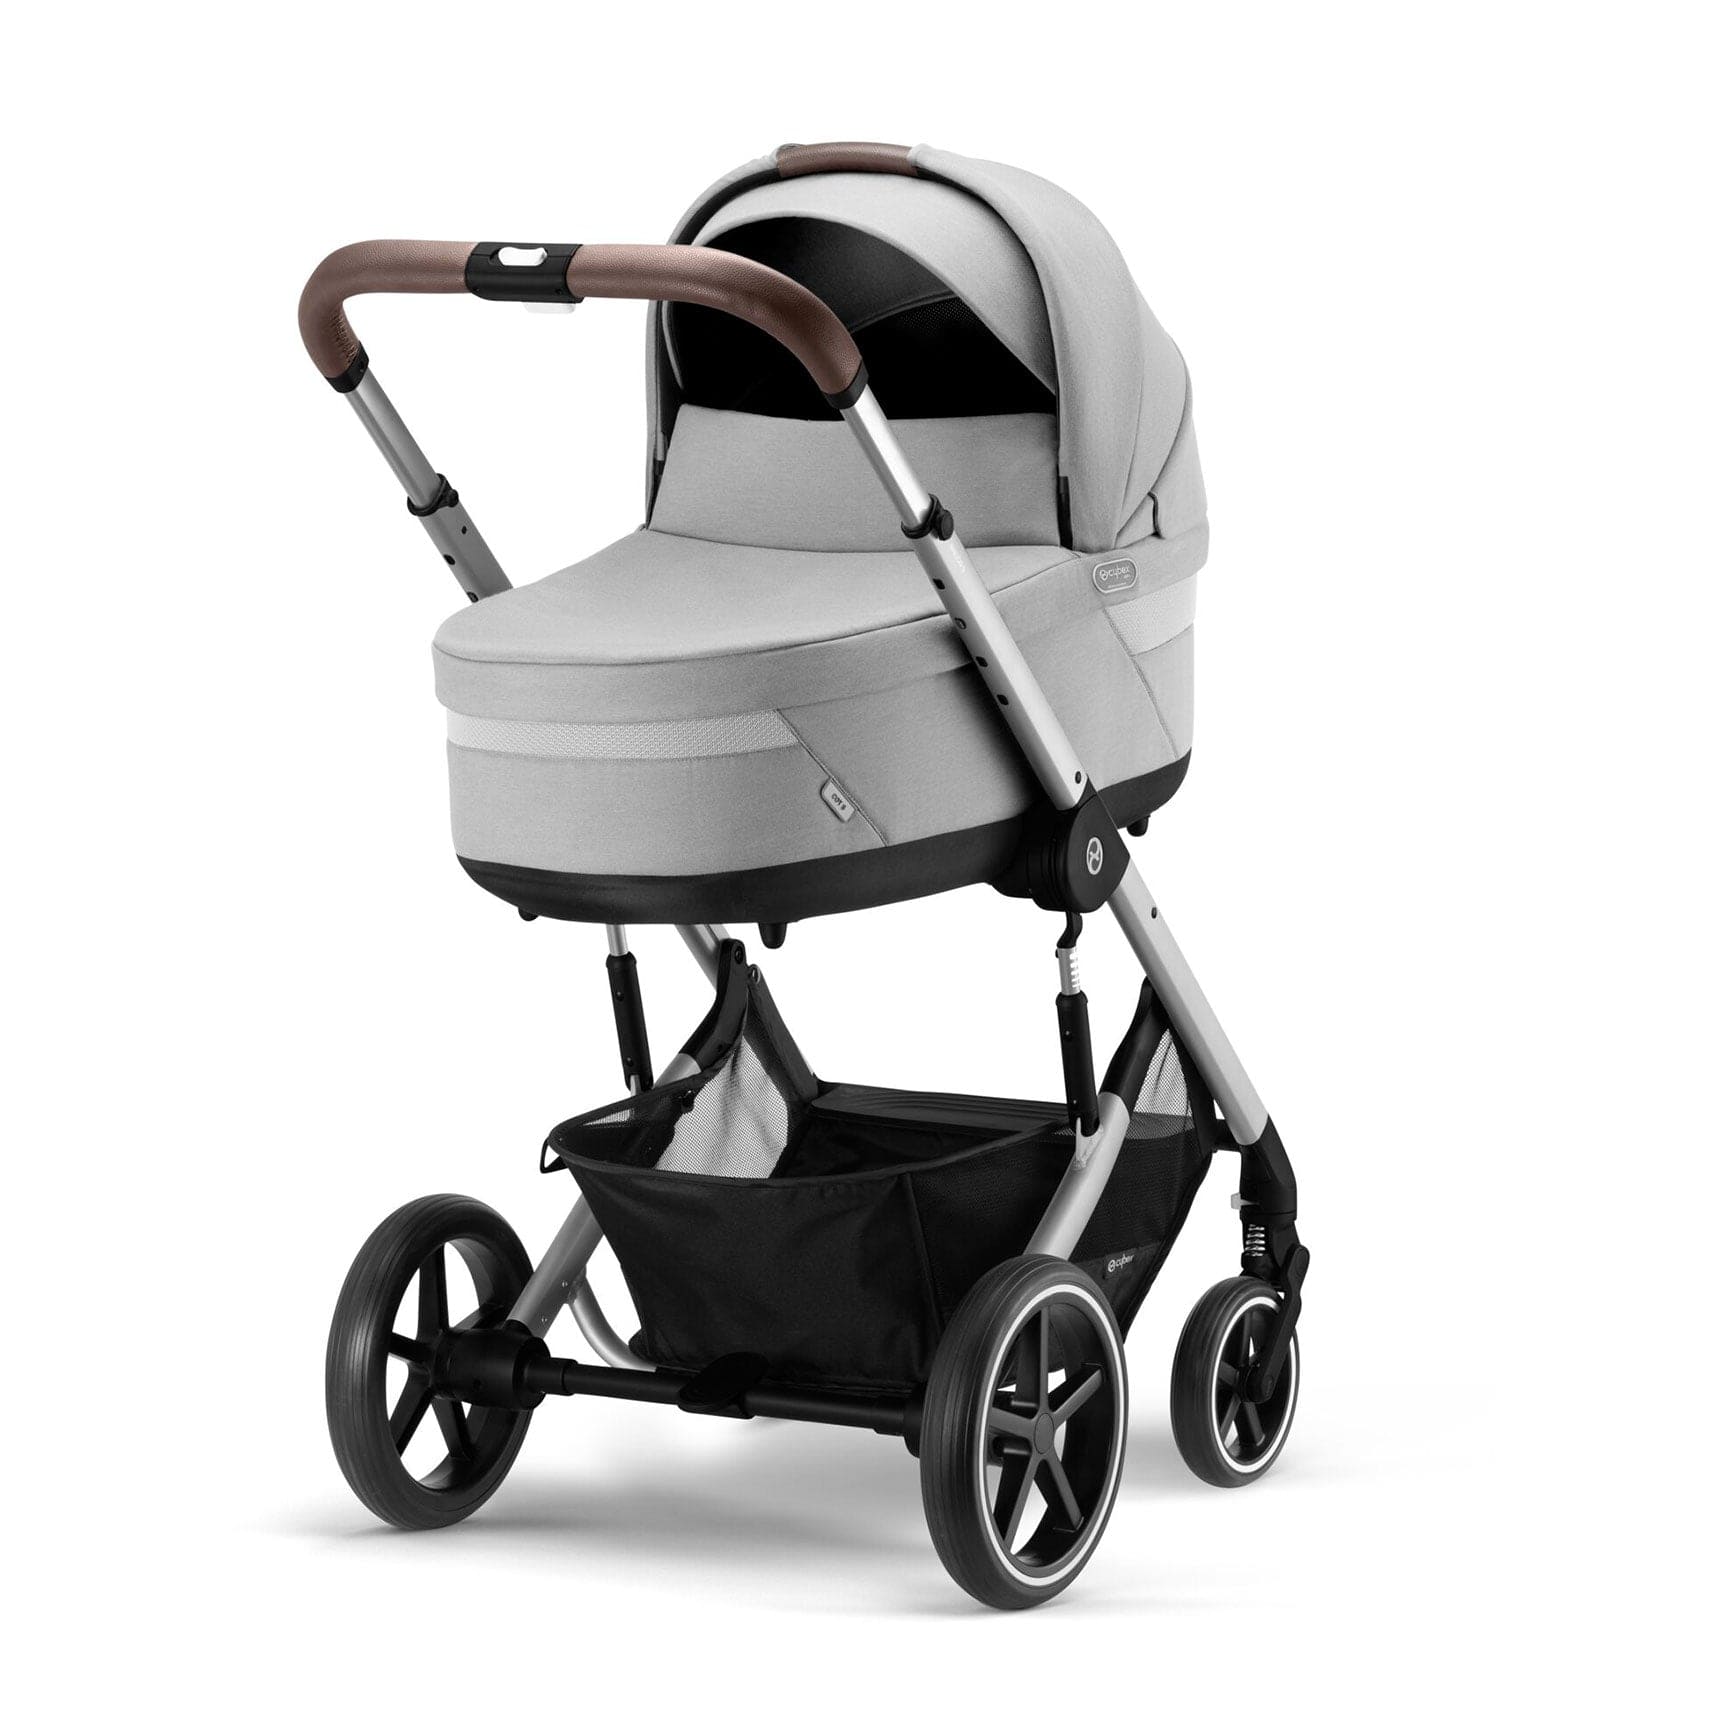 Cybex Balios Comfort Bundle in Silver/Lava Grey Travel Systems 127456-SLV-LAV-GRY 4063846317967